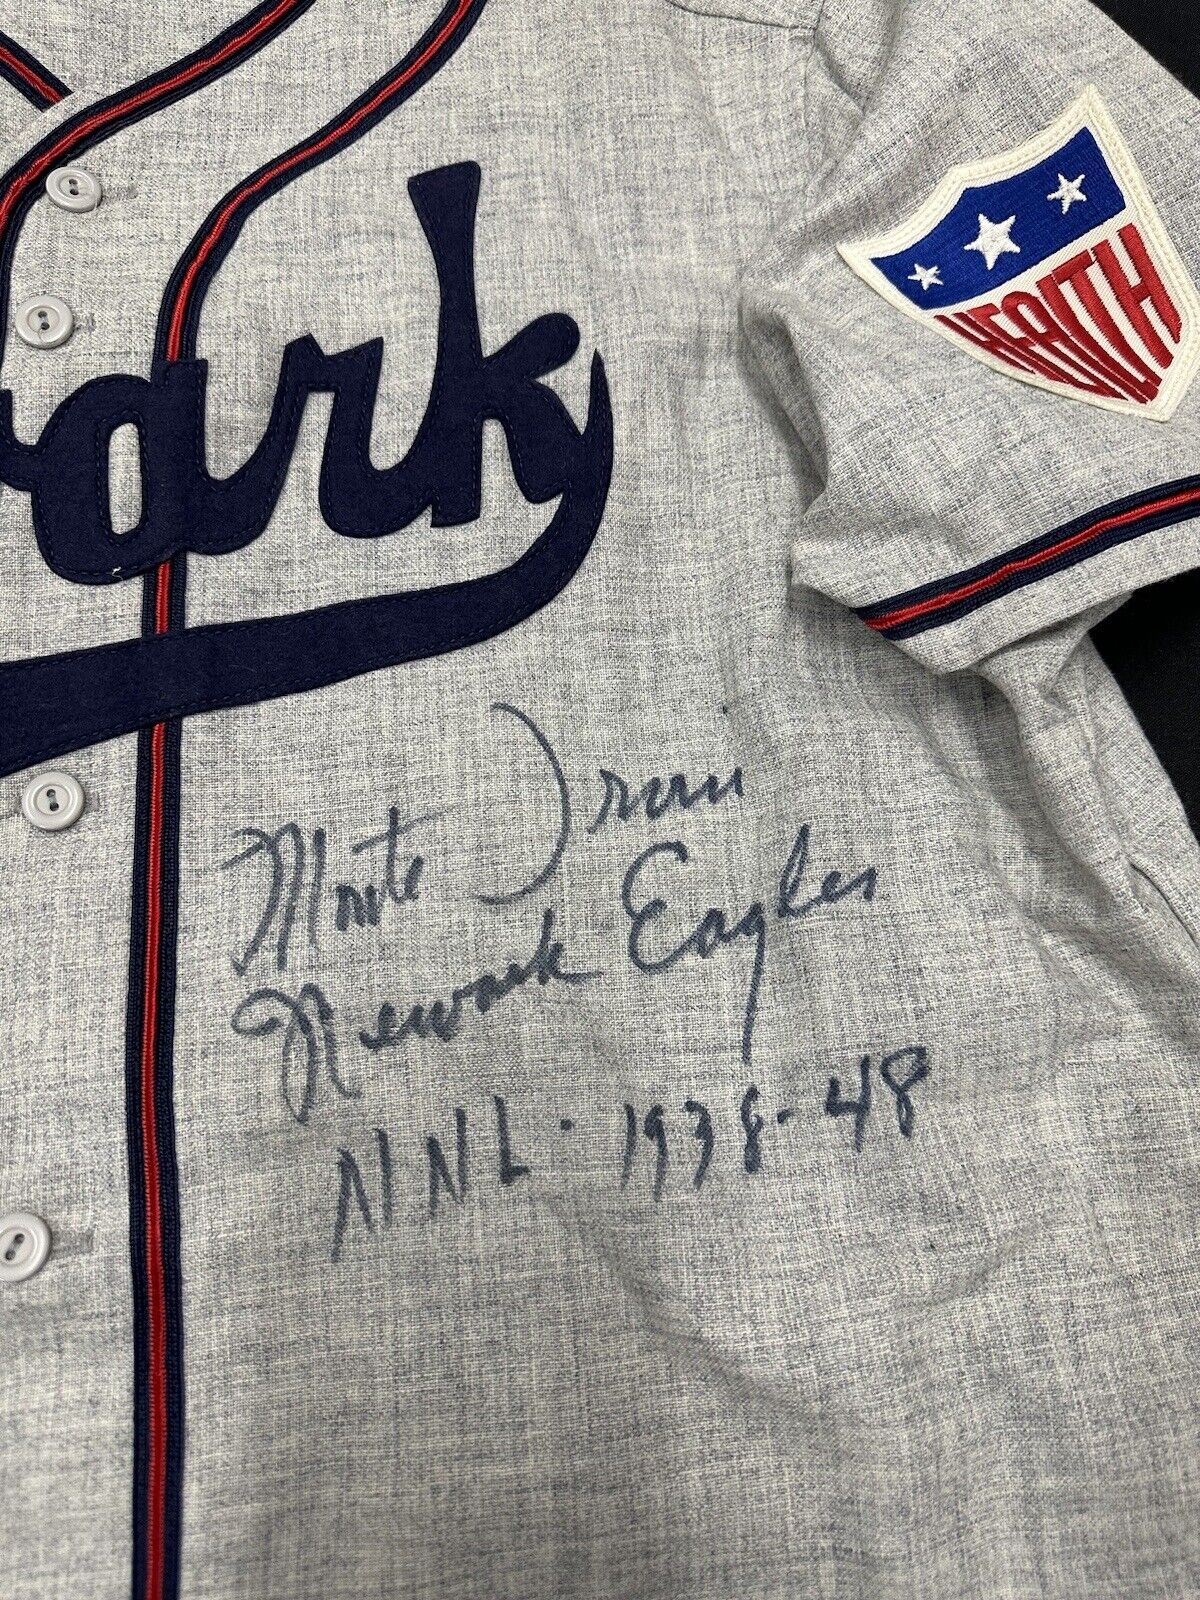 Monte Irvin Newark Eagles Signed Authentic Mitchell Ness Jersey JSA